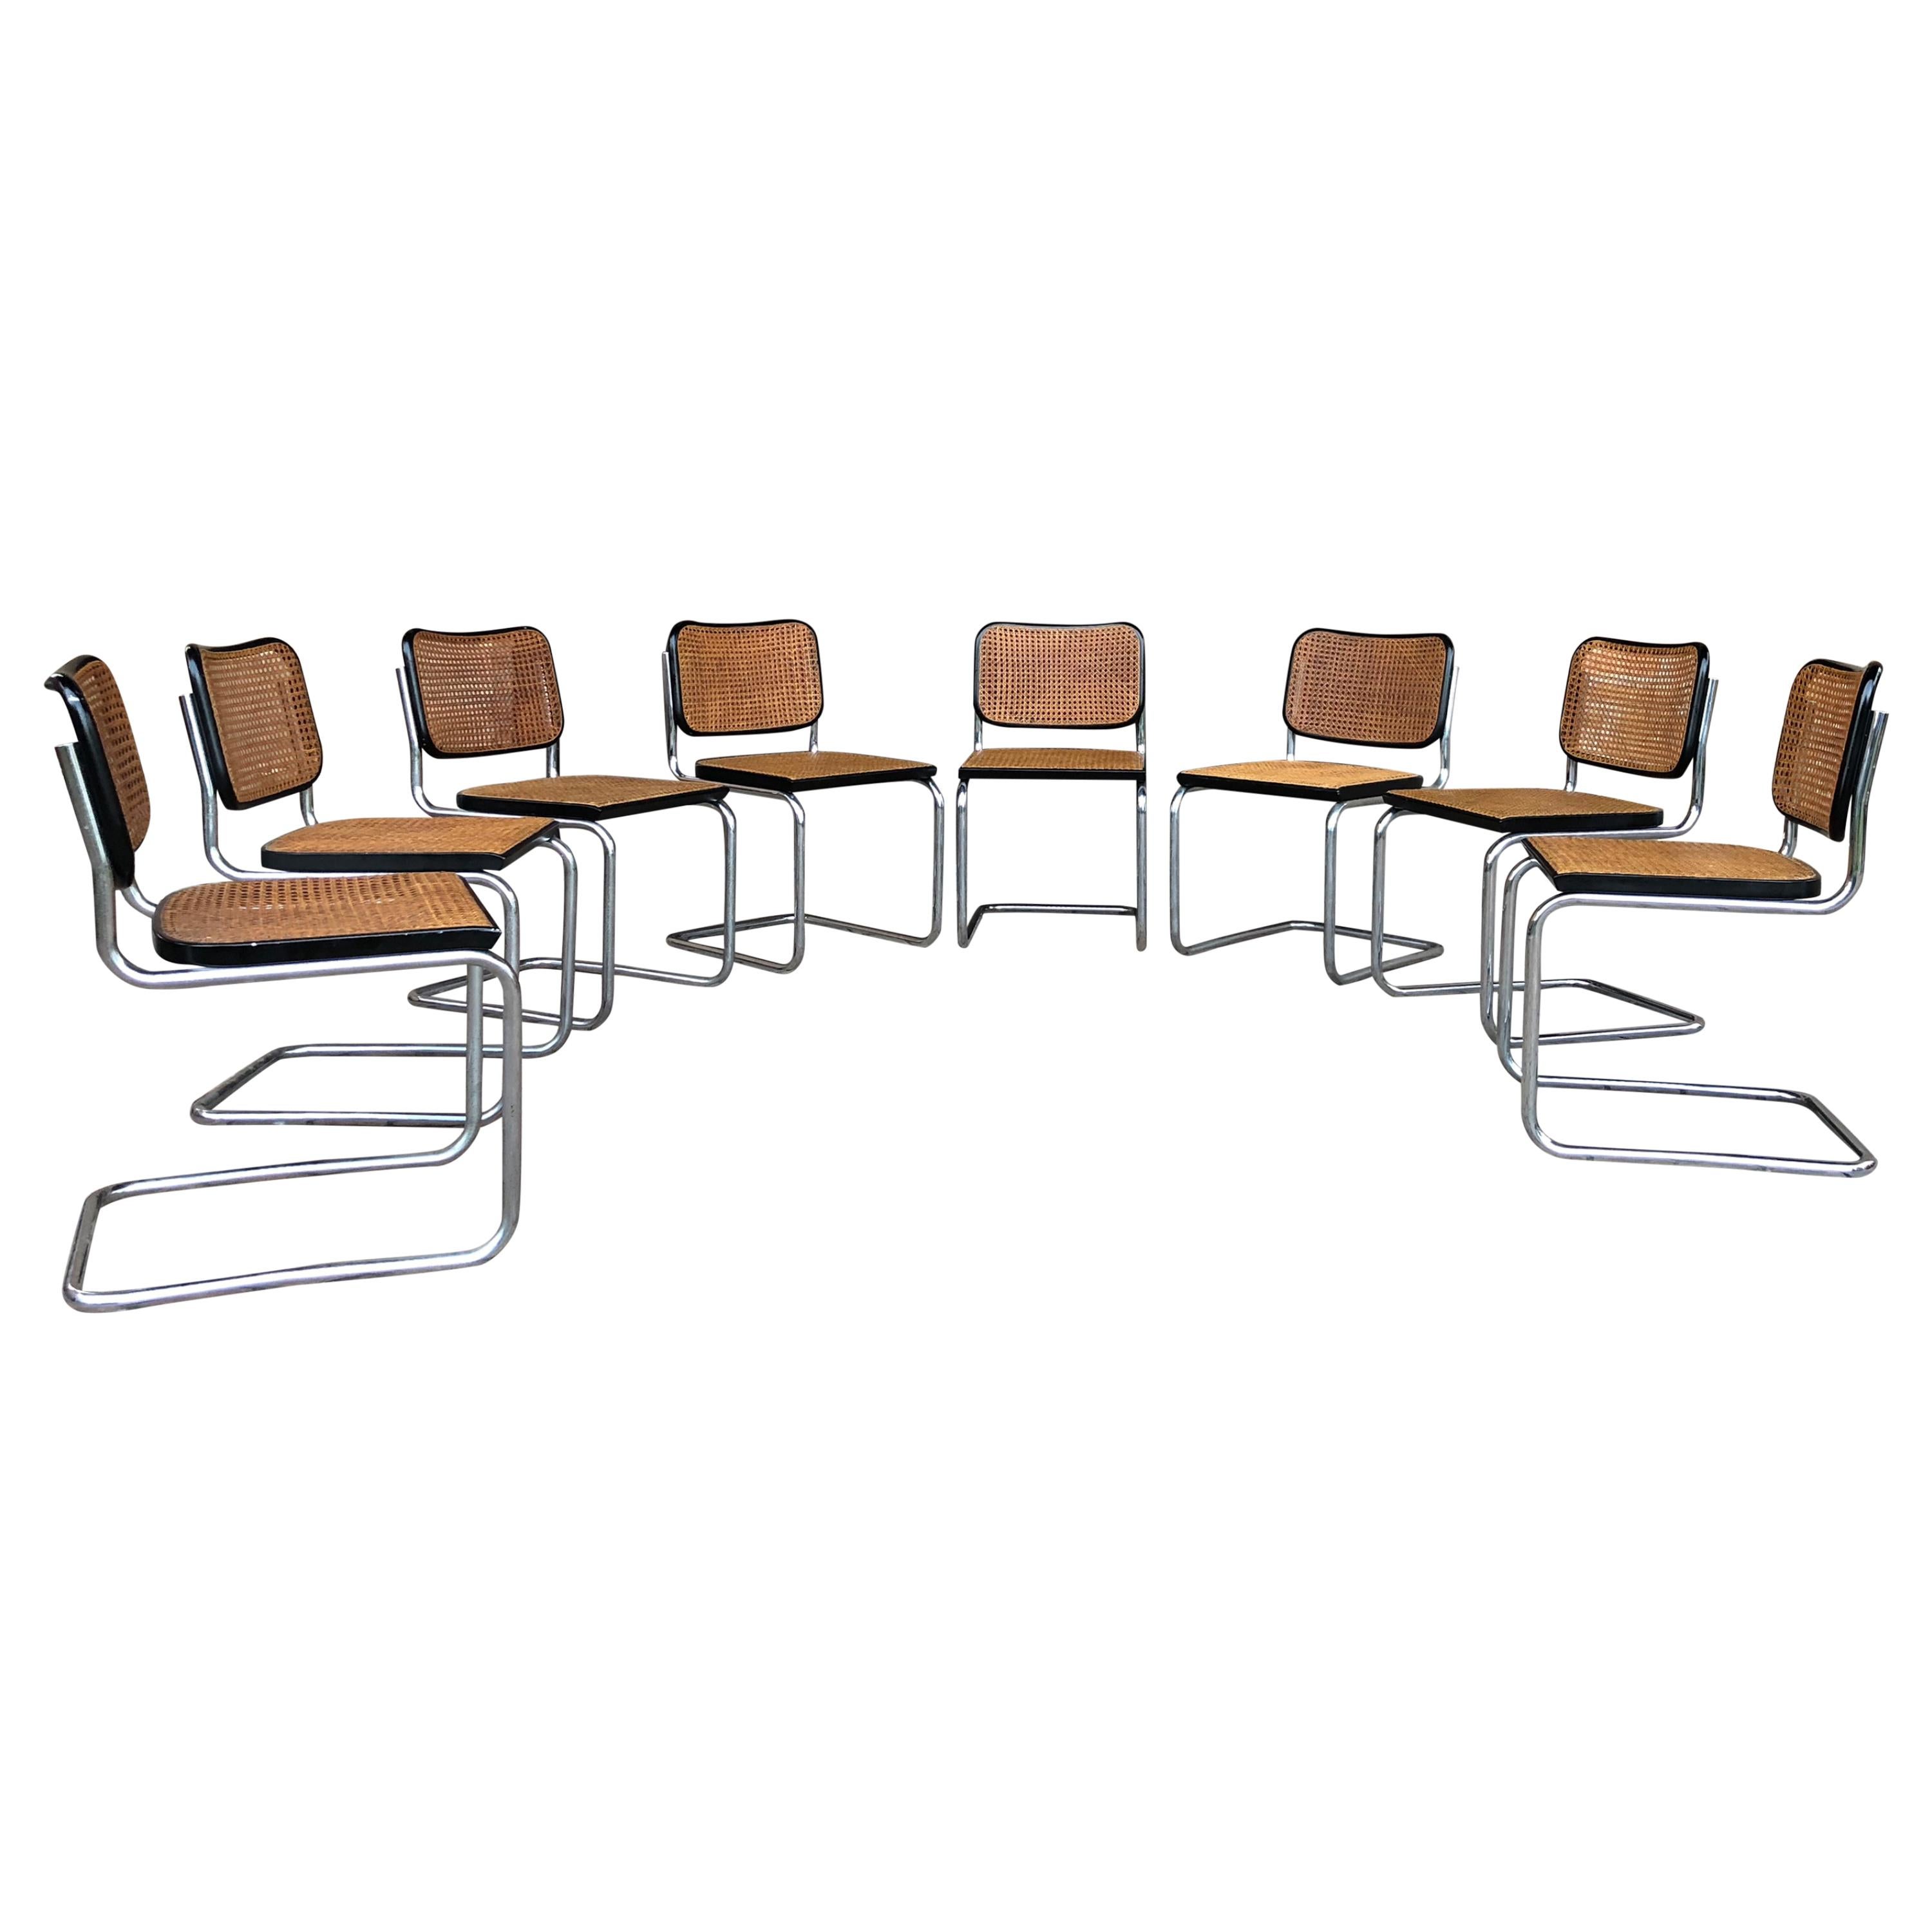 Beautiful set of 8 original B32 “Cesca” dining chairs produced by Gavina in 1963.
They are all signed with the original paper mark.
Cesca chairs were originally designed in 1928 by French Hungarian architect Marcel Breuer and named after his